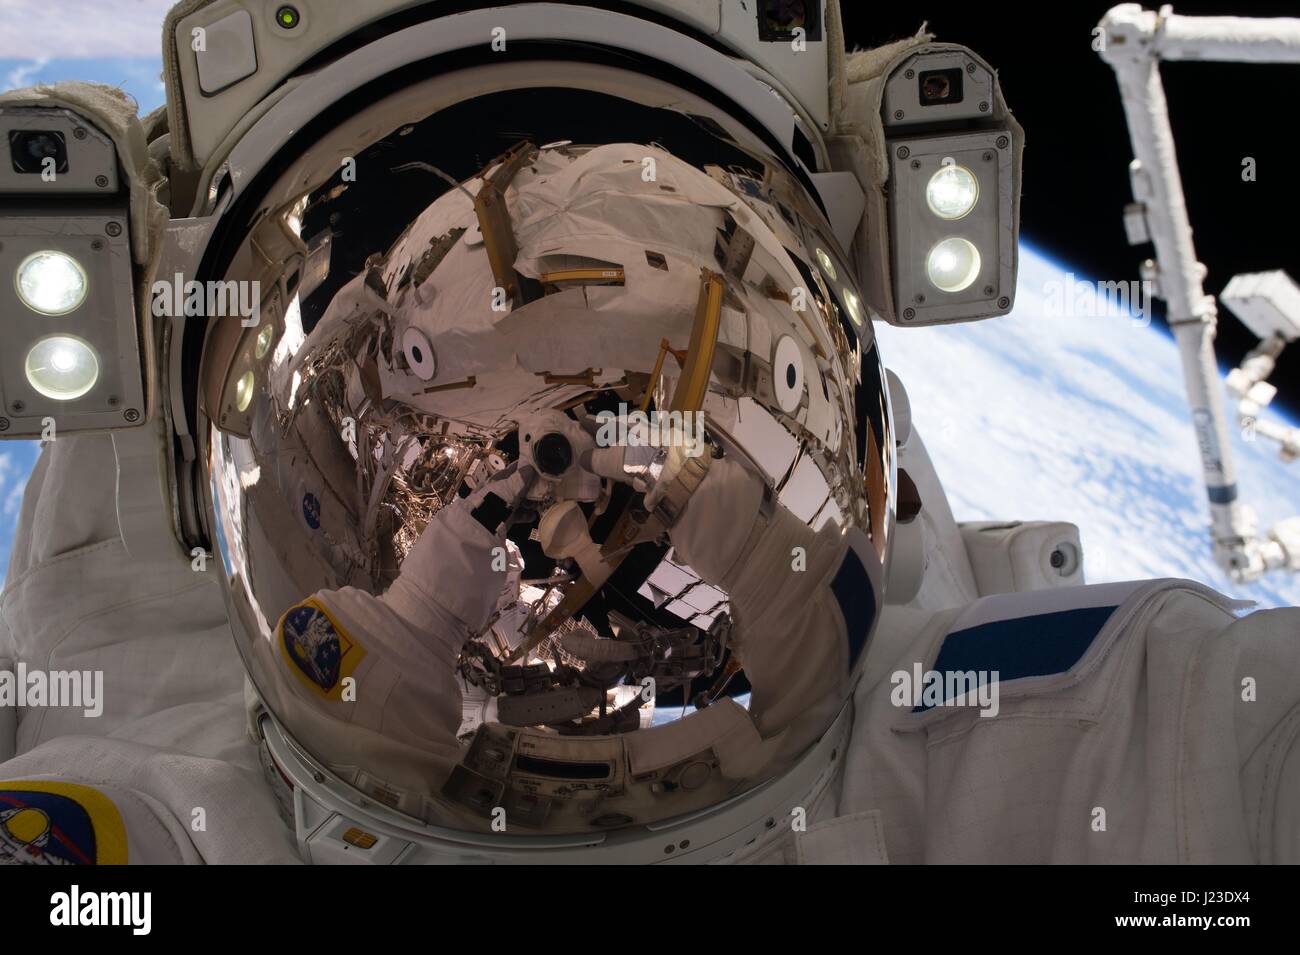 NASA Expedition 50 prime crew member French astronaut Thomas Pesquet of the European Space Agency works on the International Space Station during a spacewalk January 13, 2017 in Earth orbit.    (photo by NASA via Planetpix) Stock Photo